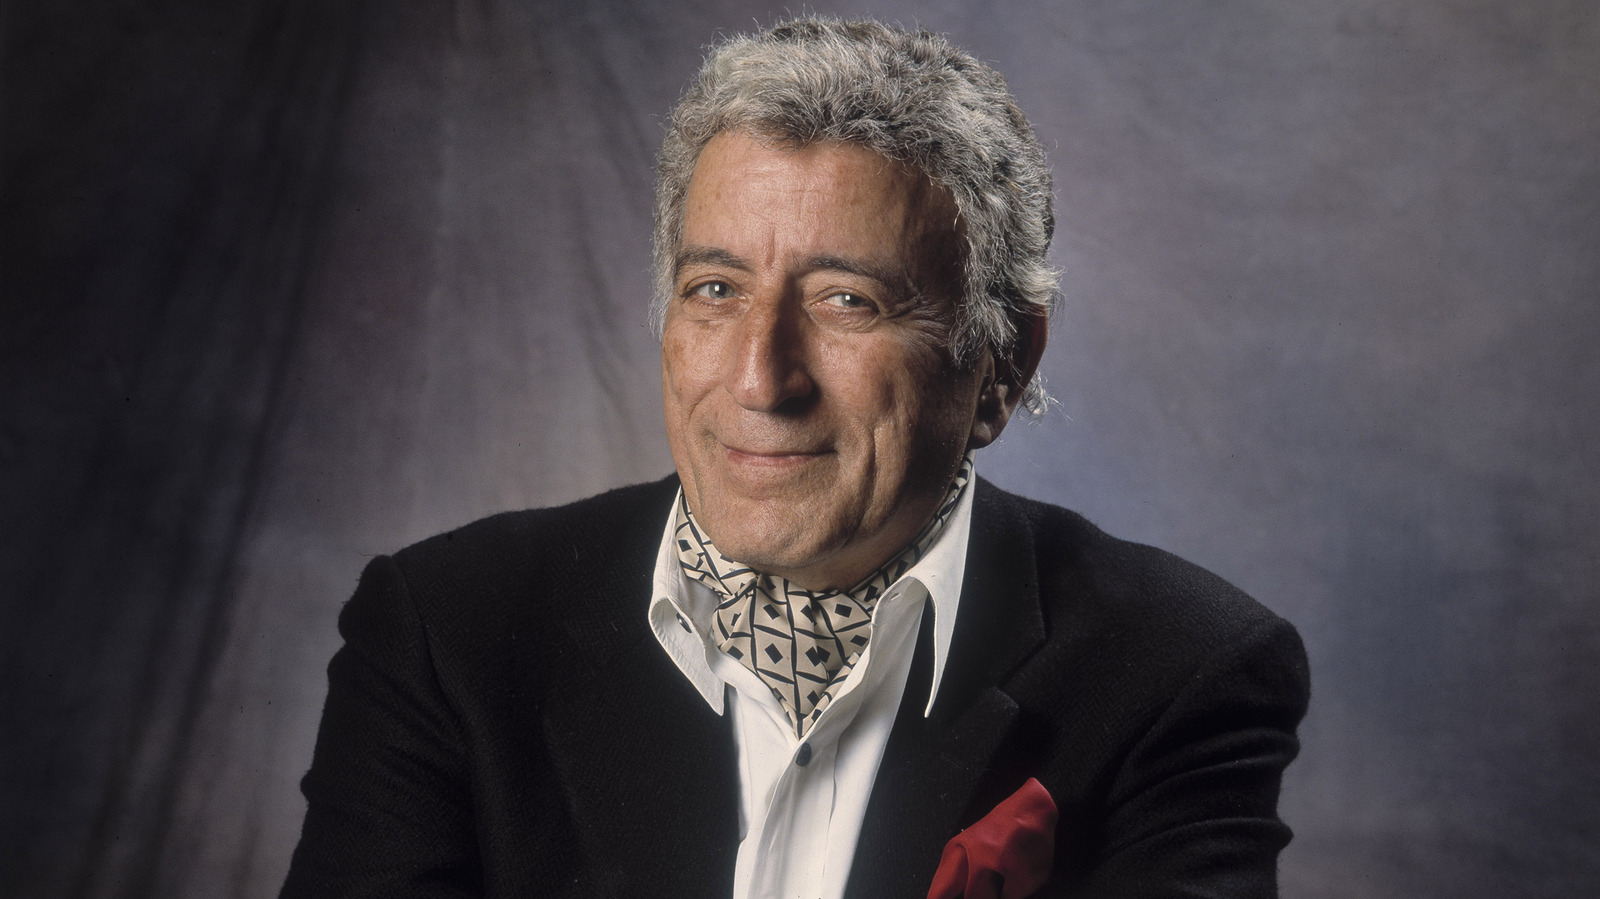 12 Iconic People Tony Bennett Had Duets With - 247 News Around The World